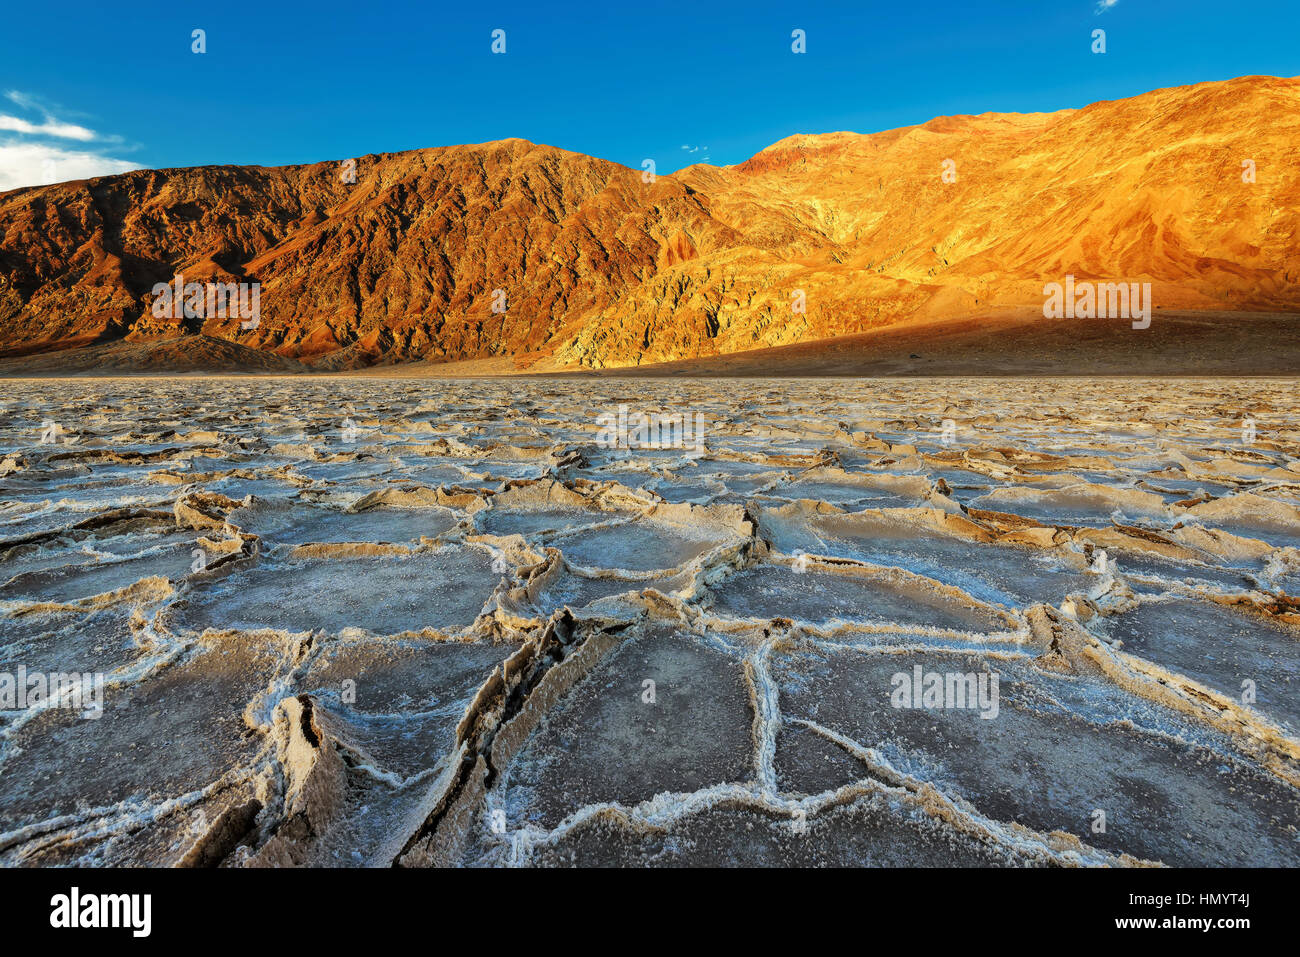 Sunset over Badwater basin, Death Valley National Park, California. Stock Photo